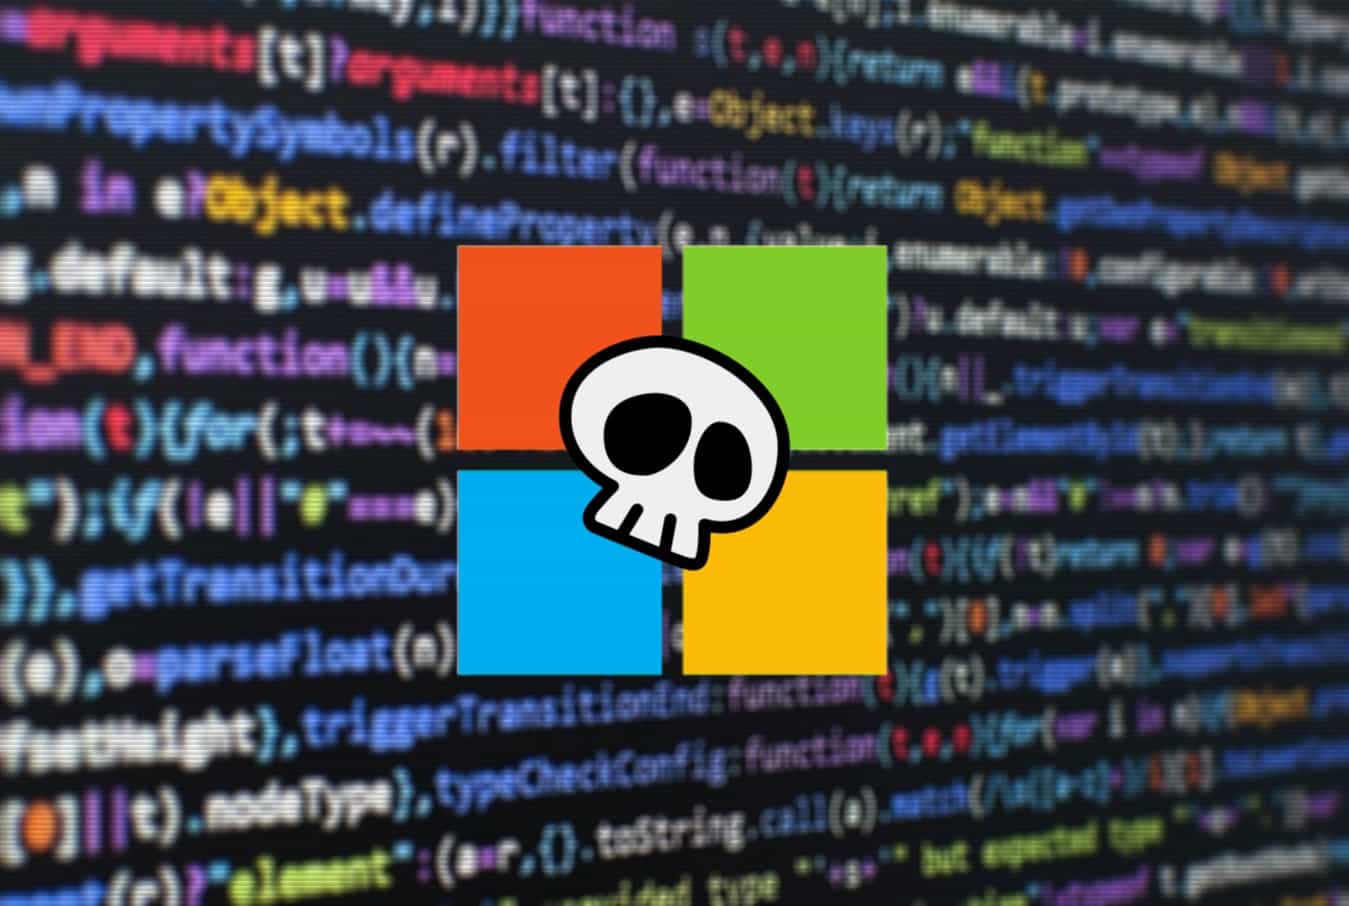 Microsoft reveals hackers viewed its source code